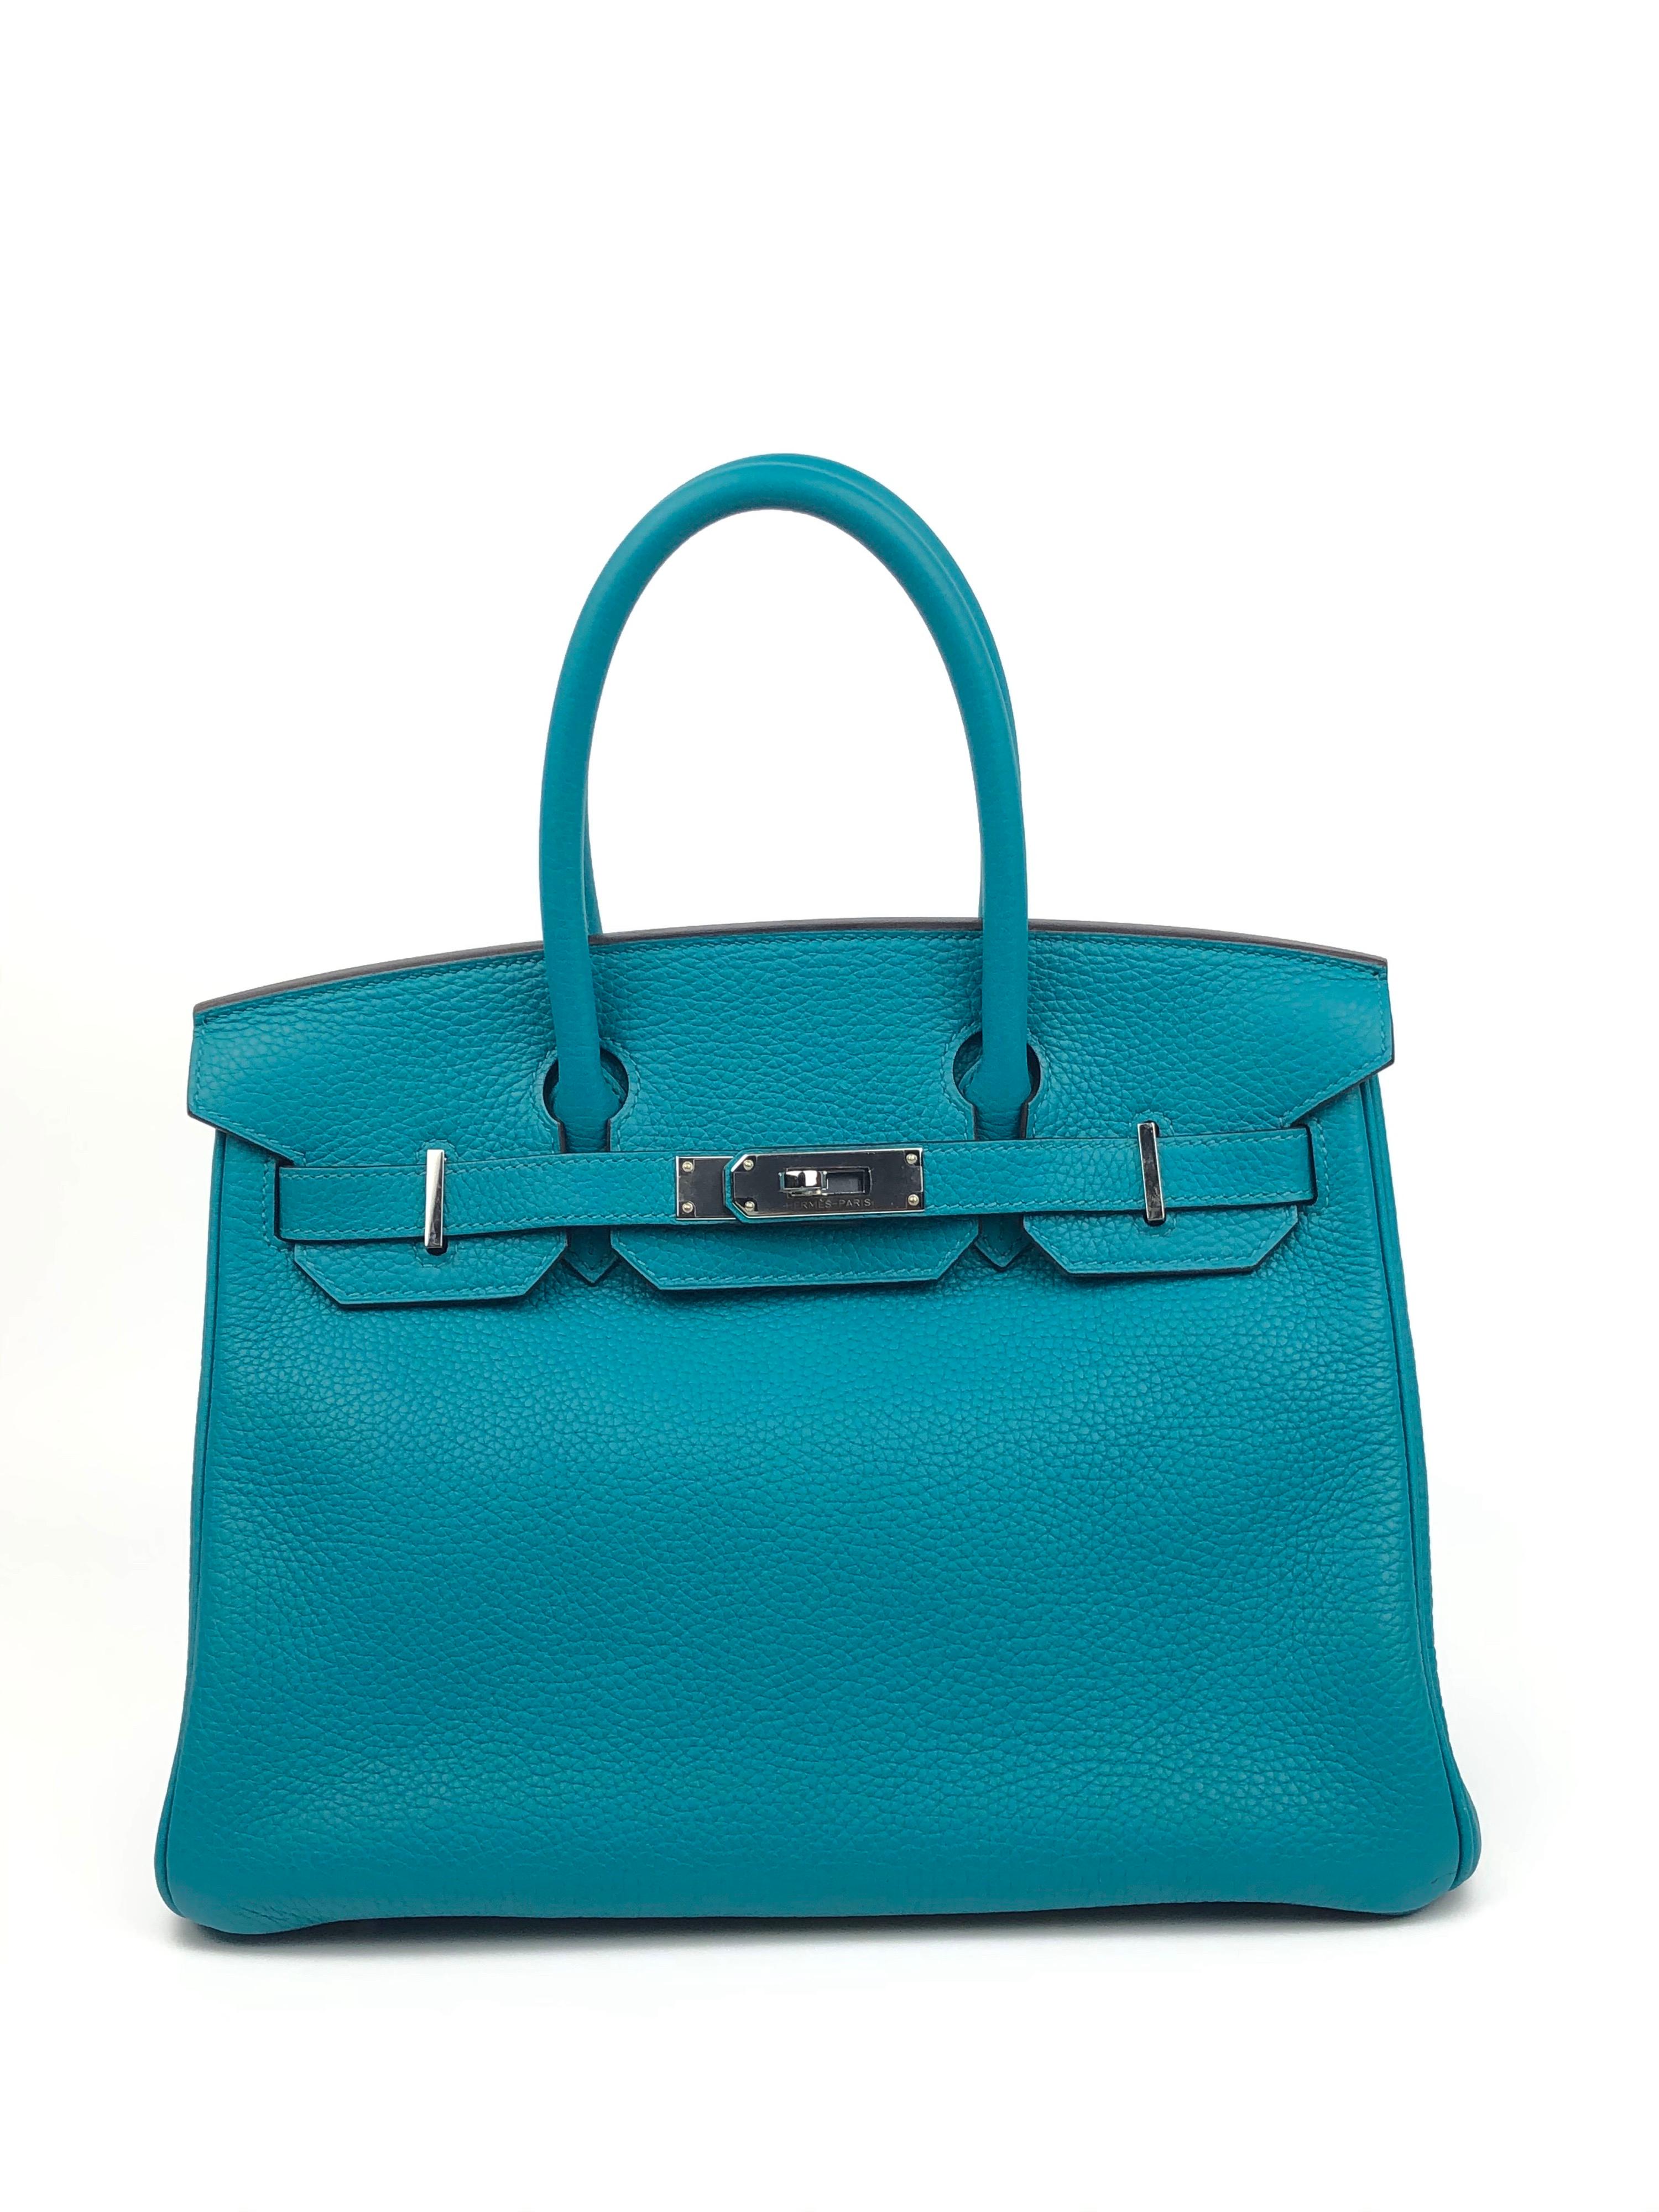 Hermes Birkin 30 Bleu Paon Palladium Hardware 2017. Pristine Condition with all plastic!

Shop with Confidence from Lux Addicts. Authenticity Guaranteed!